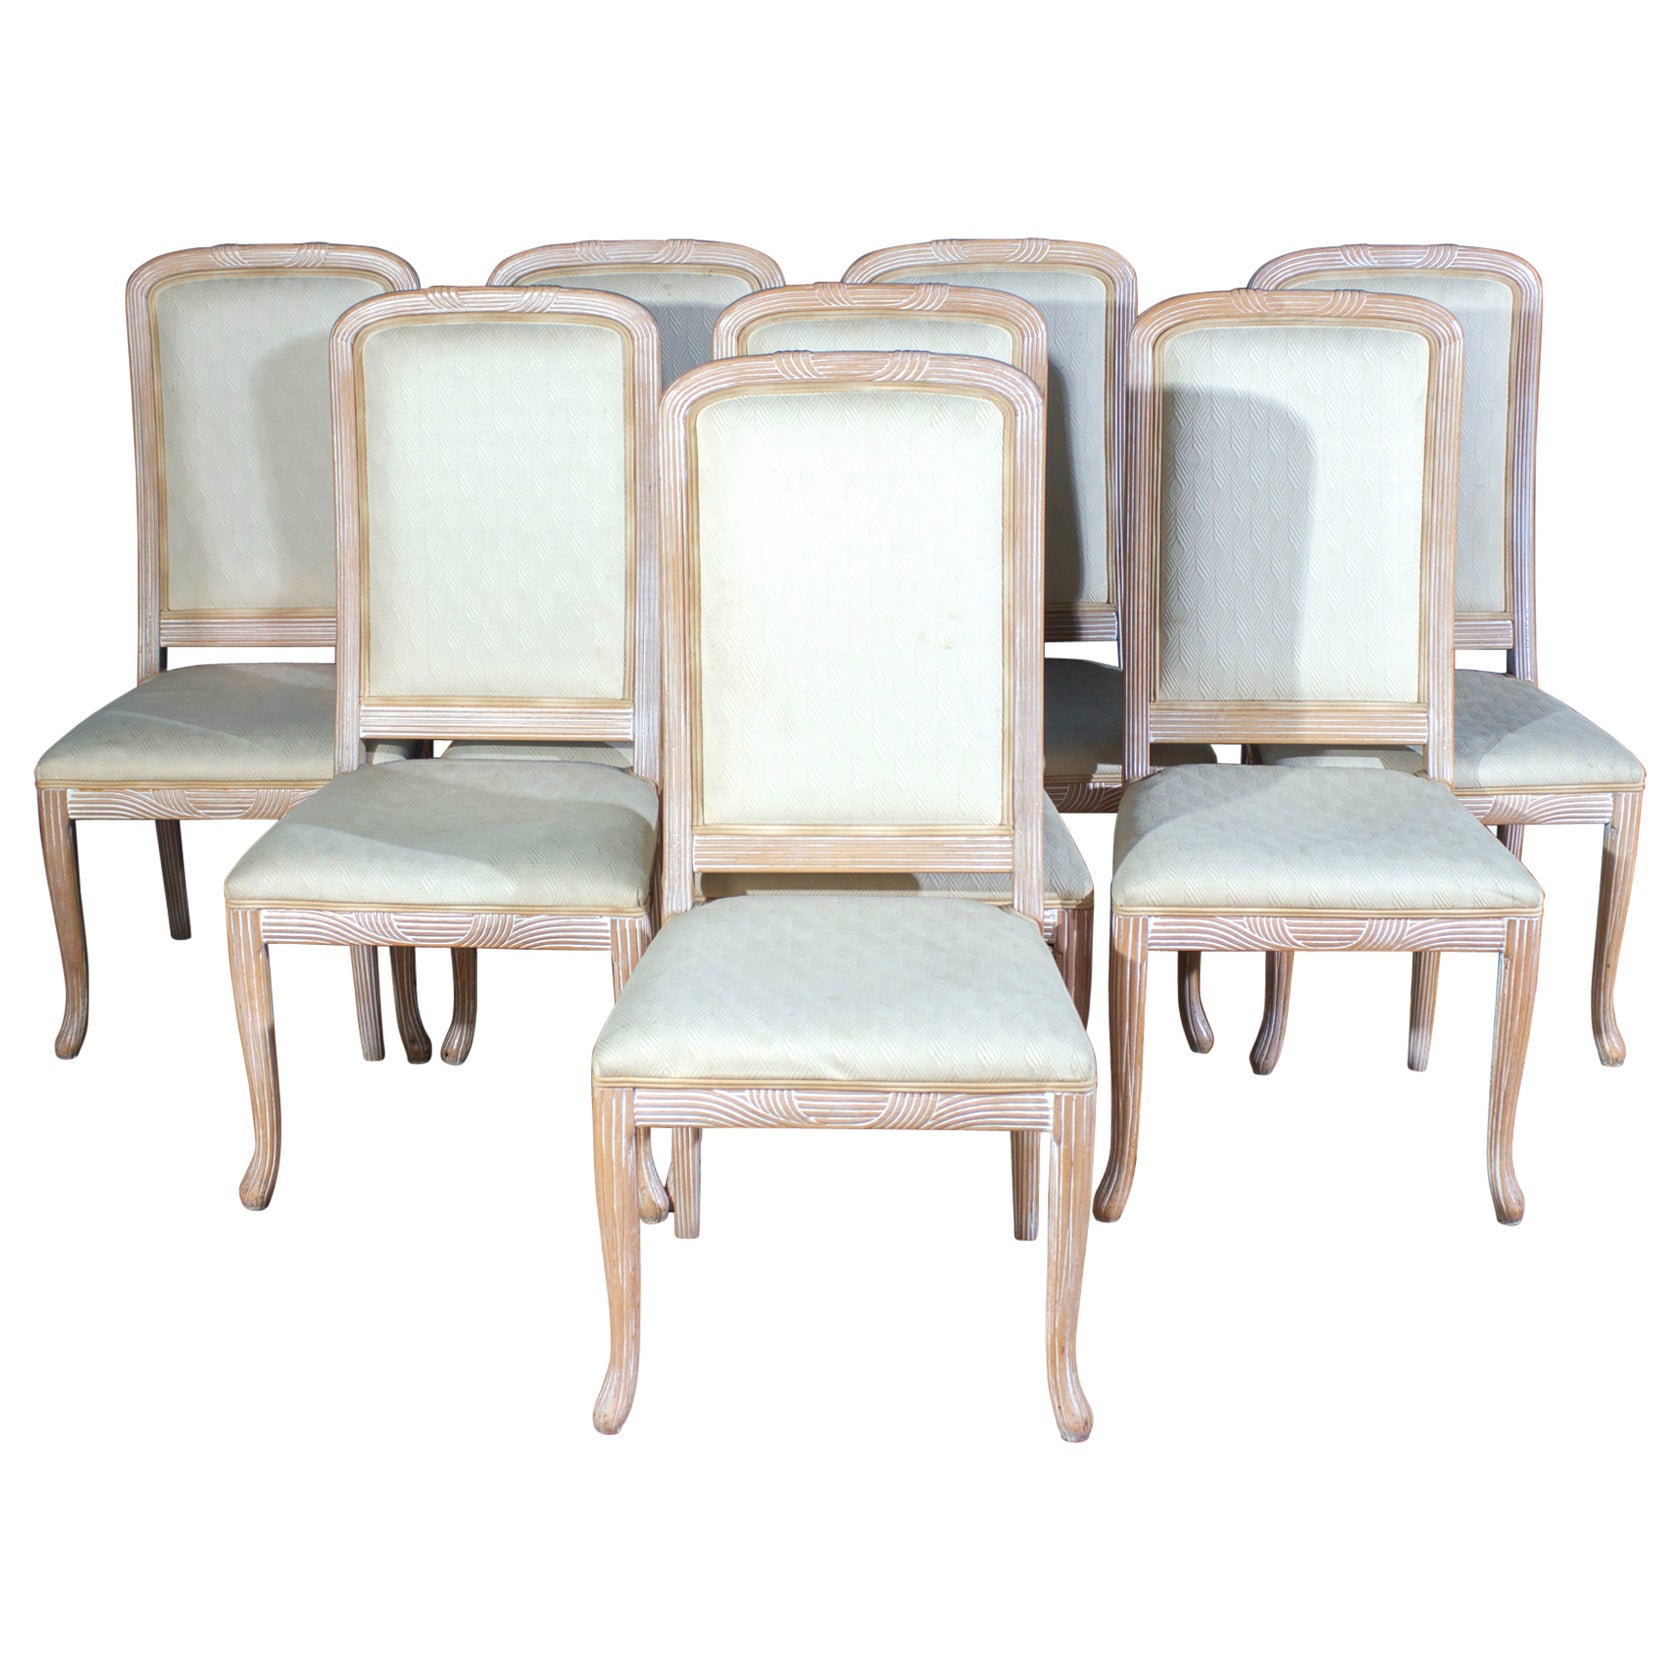 Fine Set of 8 Italian White Decapé Wood Chairs, 1970s